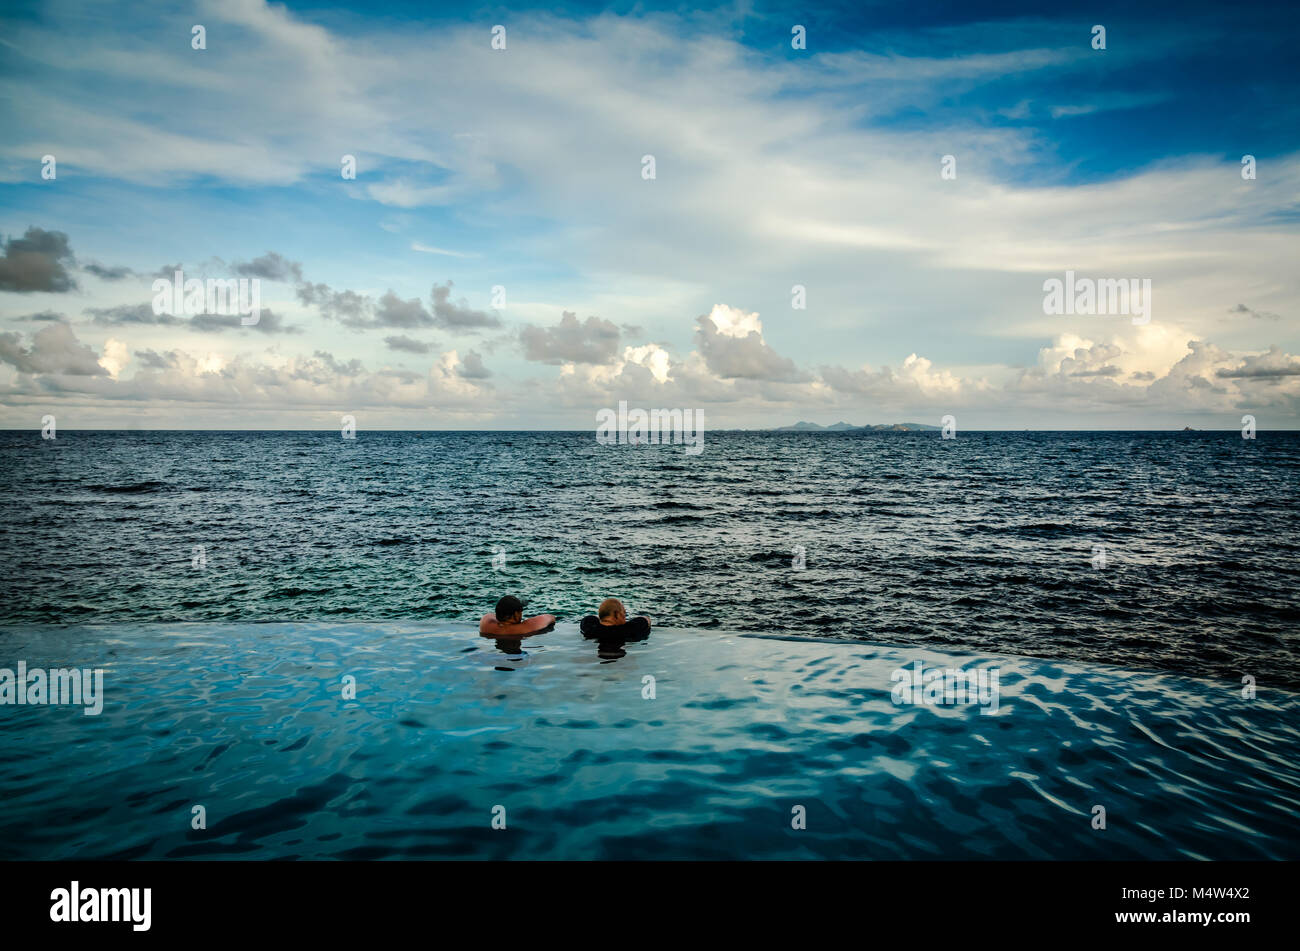 Two men hold onto the edge of an infinity pool overlooking the Caribbean Sea. Stock Photo